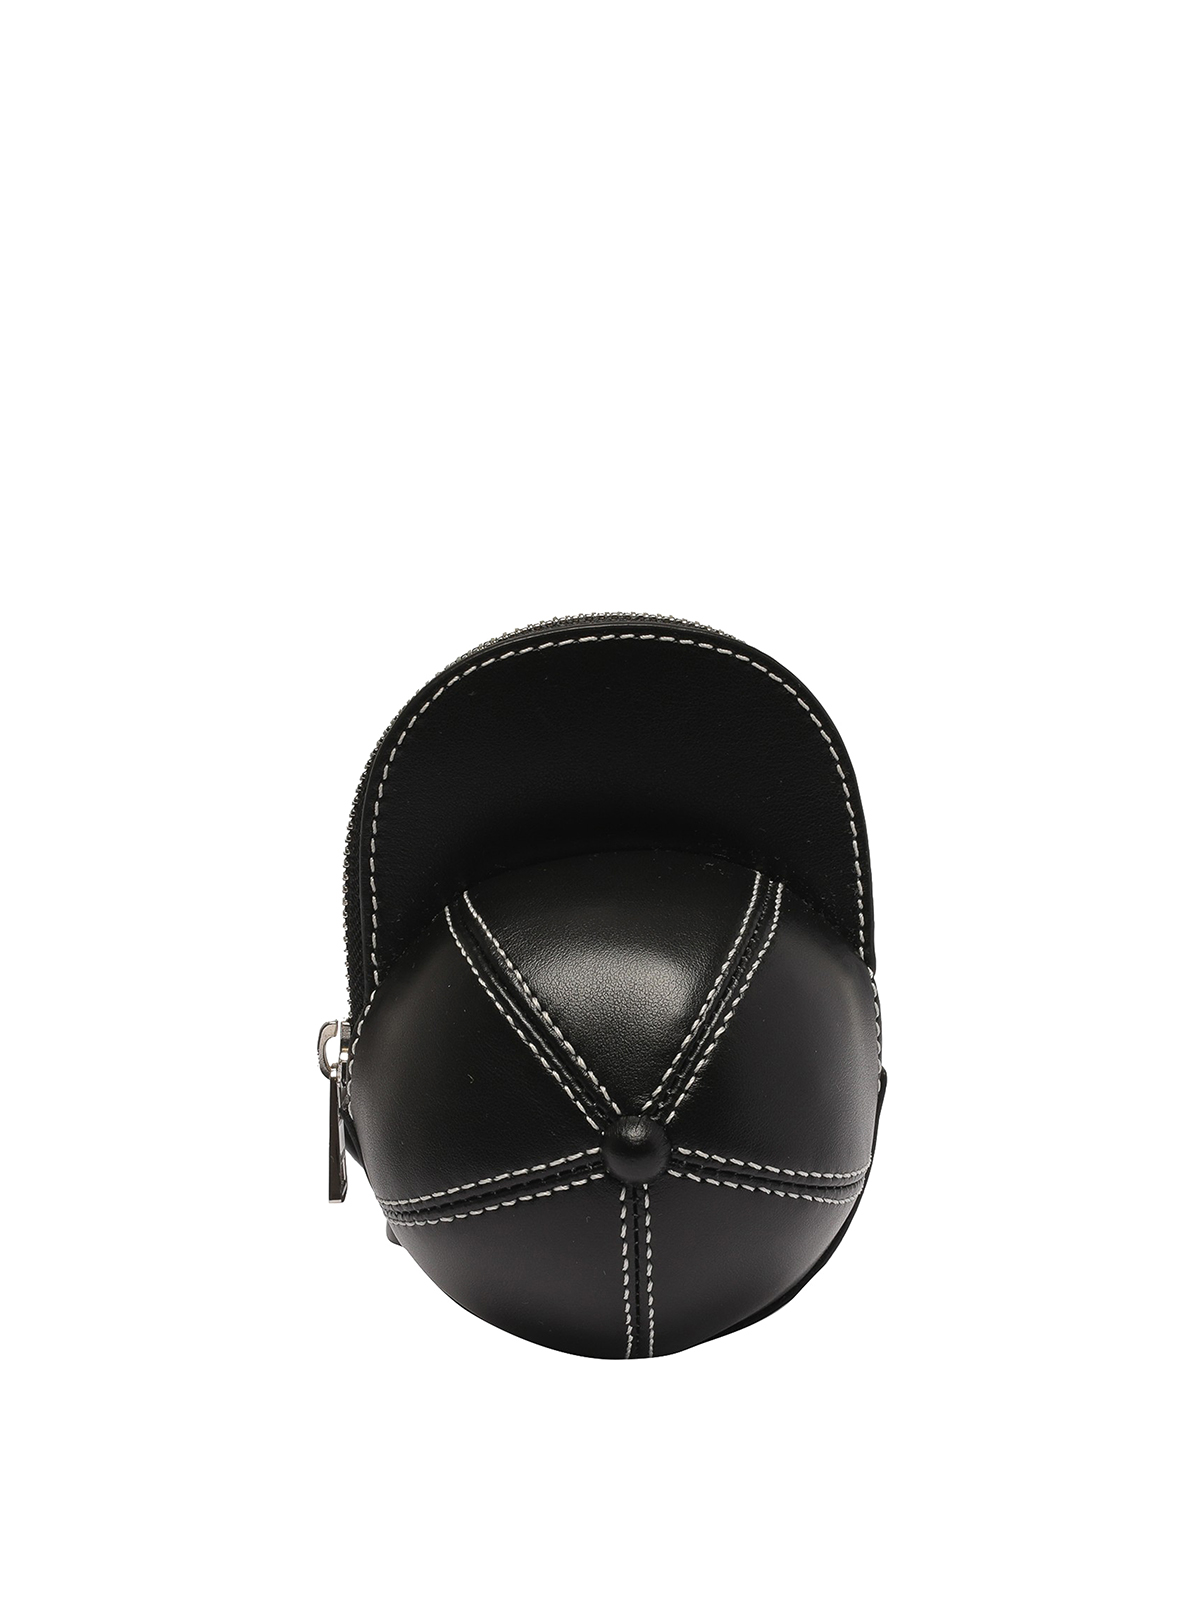 Jw Anderson Leather Shaped Cap Bag With Zip Closure In Black